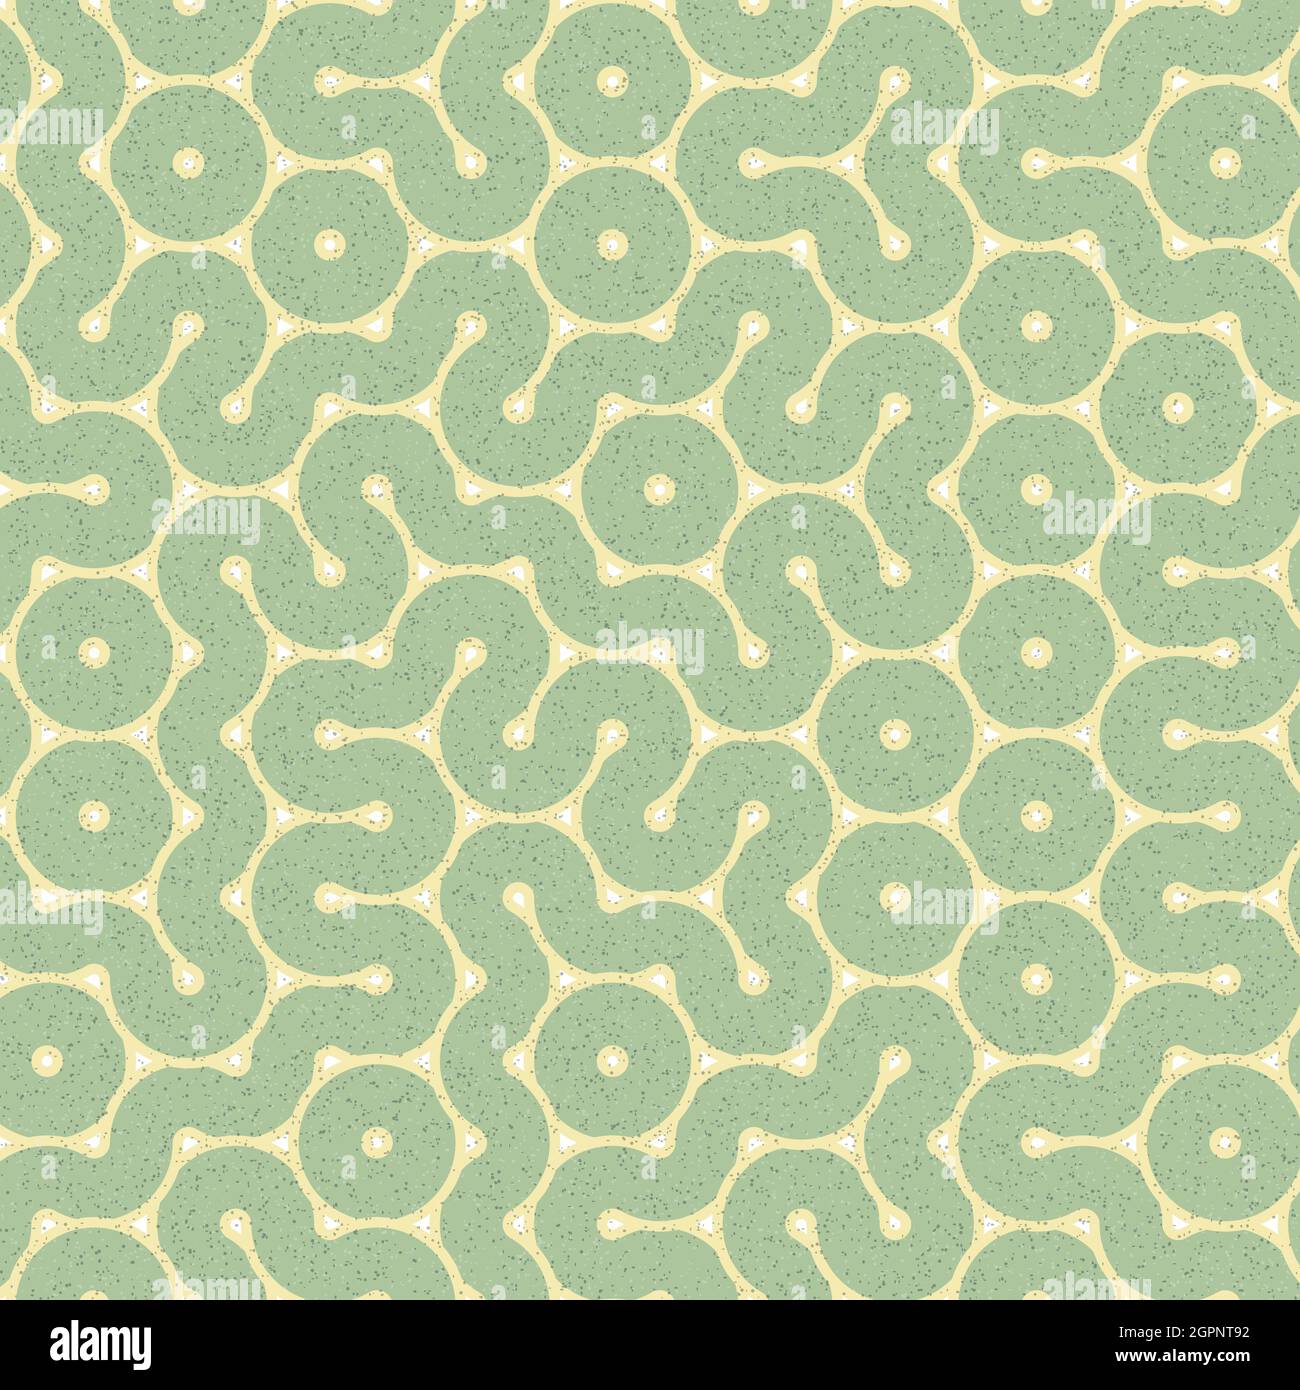 Vintage Green & White Hexagons and Circles Fabric 